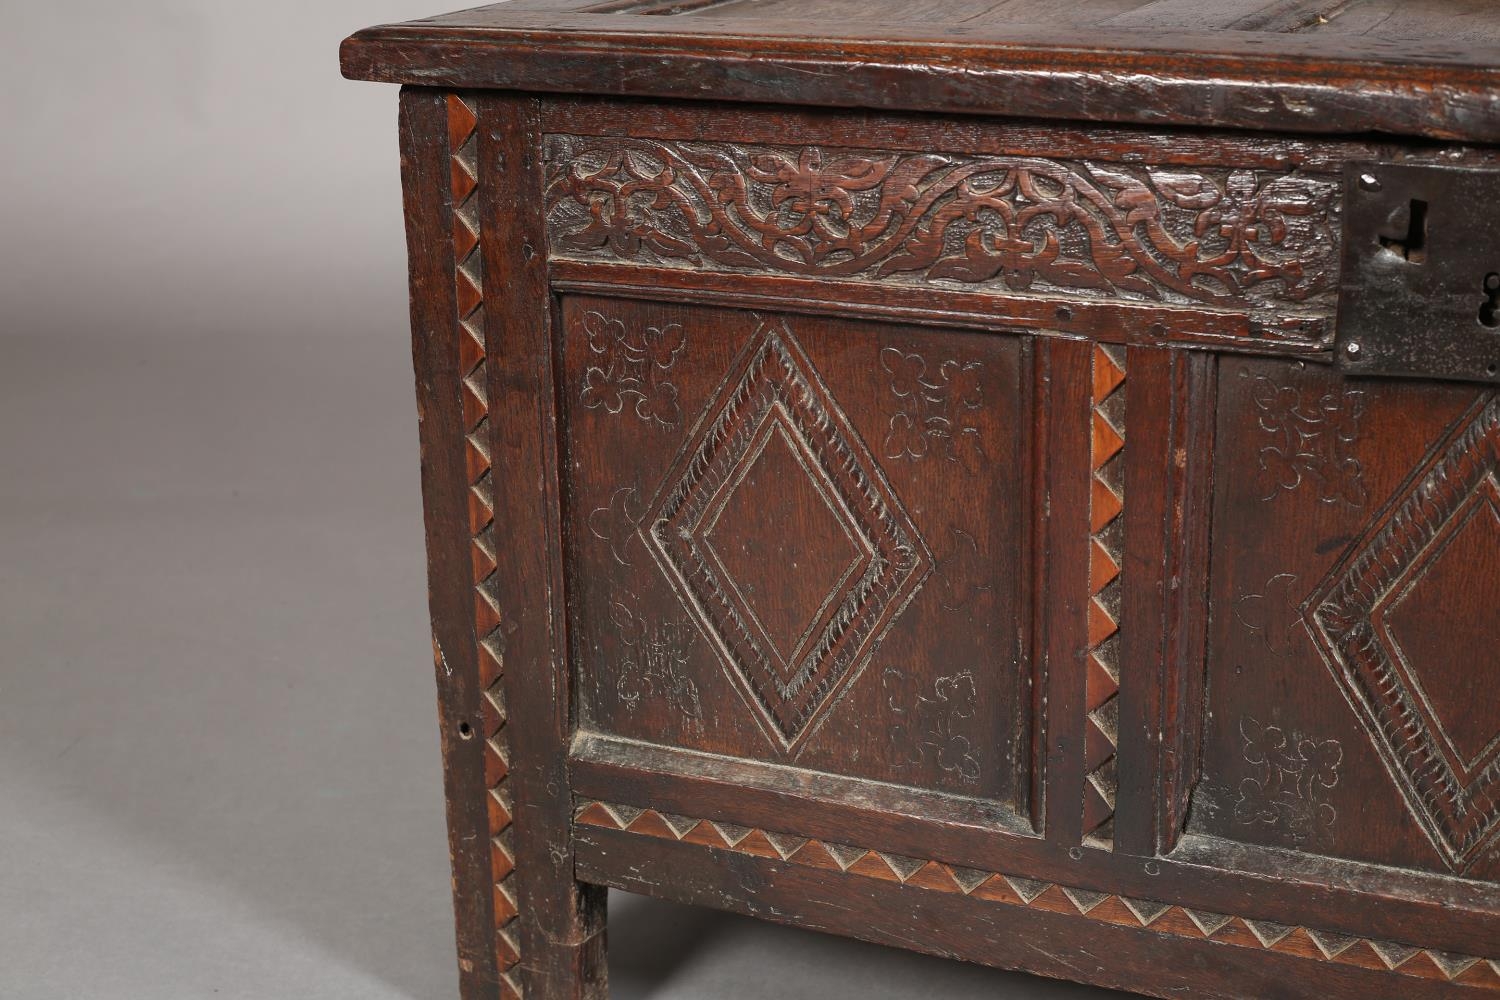 A LATE 17TH CENTURY OAK KIST HAVING A TRIPLE INDENTED TOP, the frieze intricately carved with - Image 4 of 7